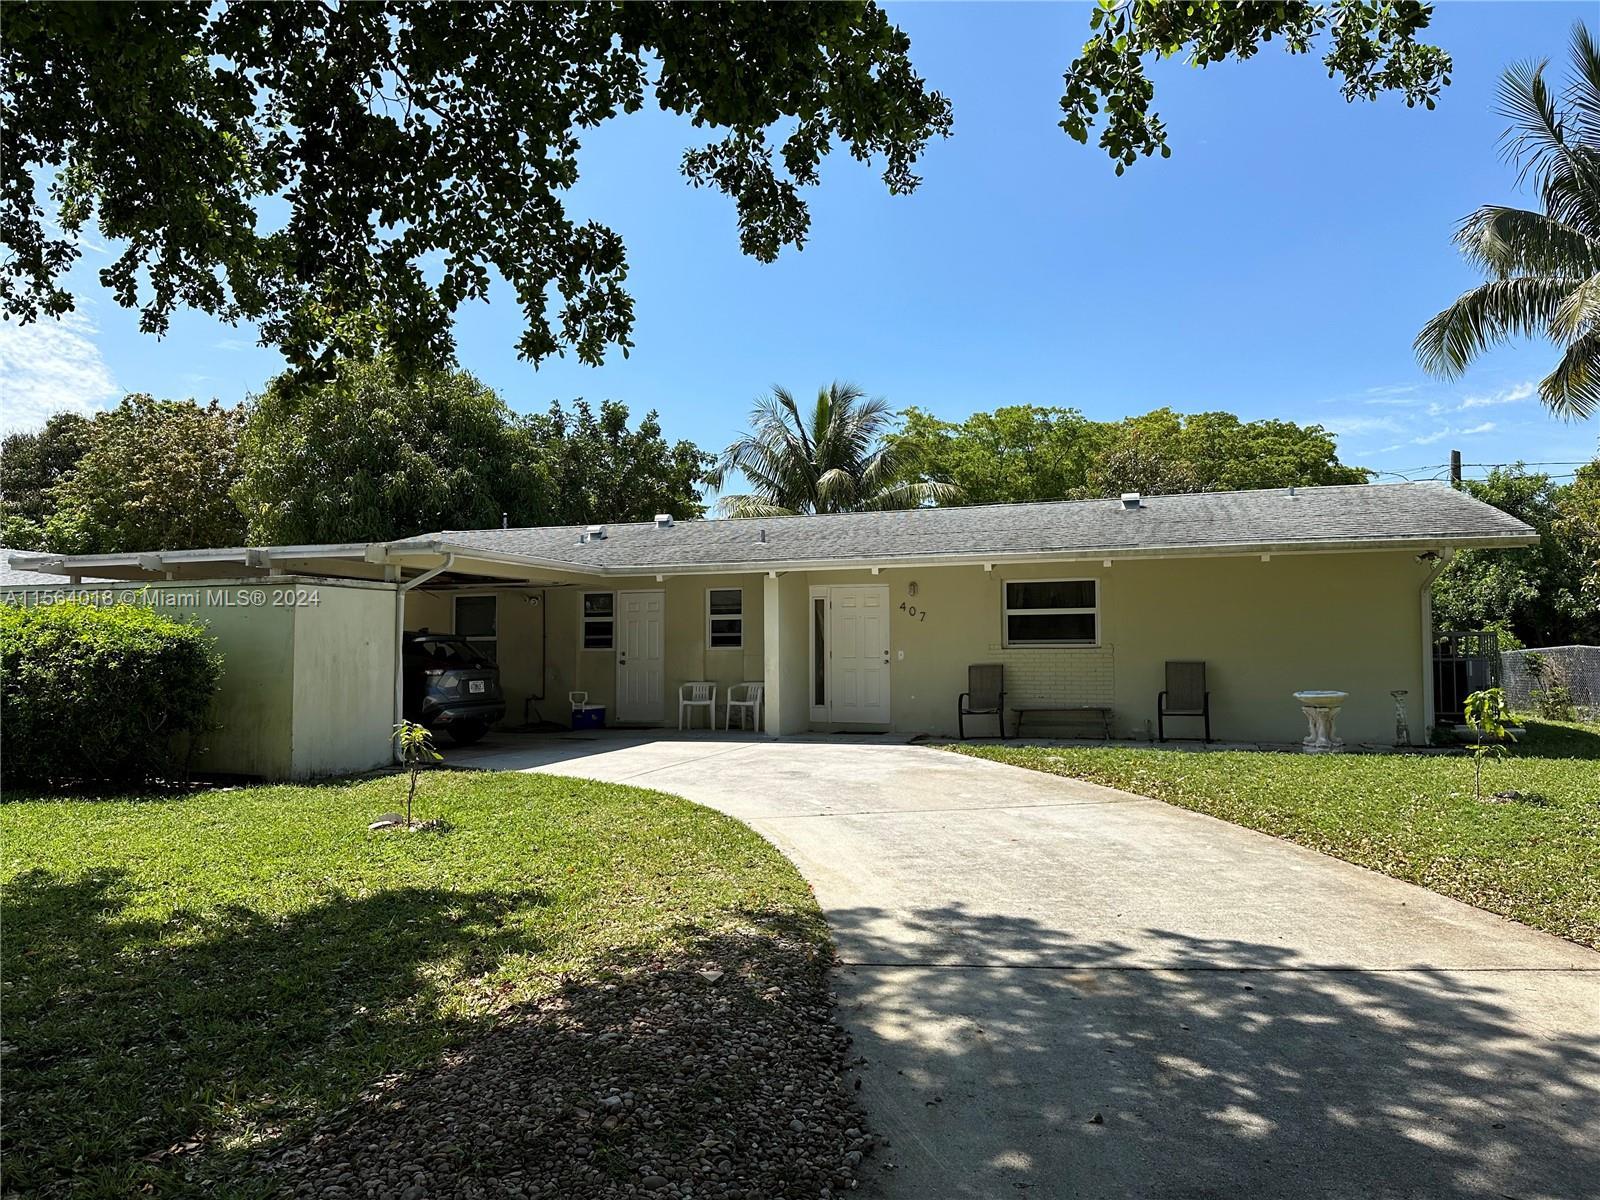 Beautifully maintained home in the quiet, peaceful neighborhood of Palm Beach Lakes. Last renovated 